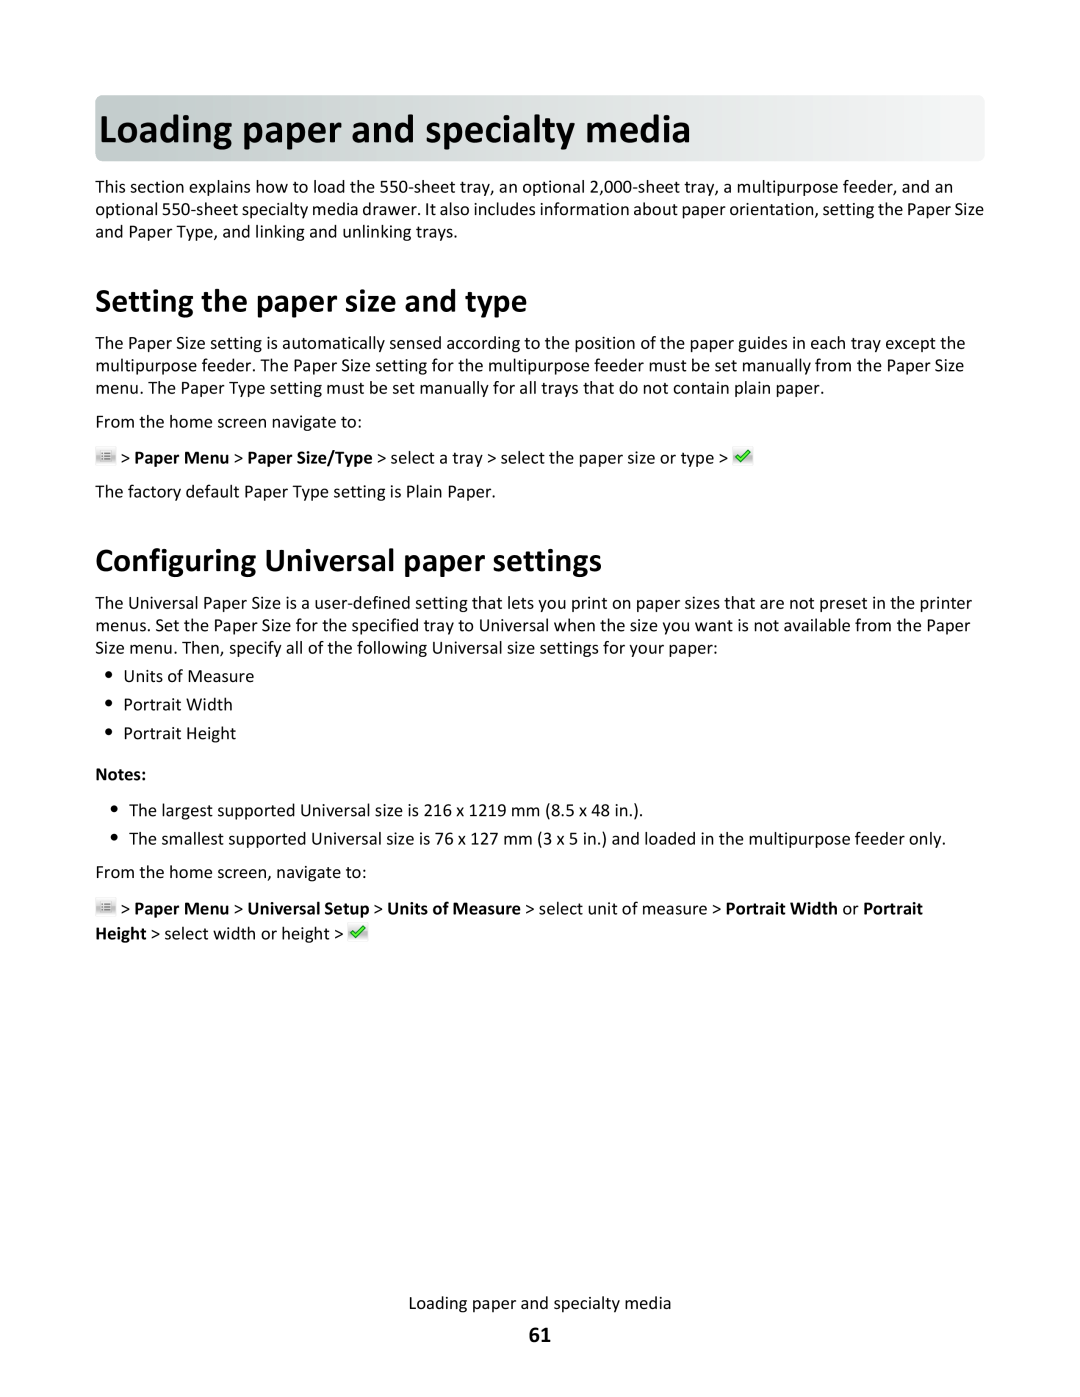 Lexmark C790 manual Loading paper andspecialtymedia, Setting the paper size and type, Configuring Universal paper settings 